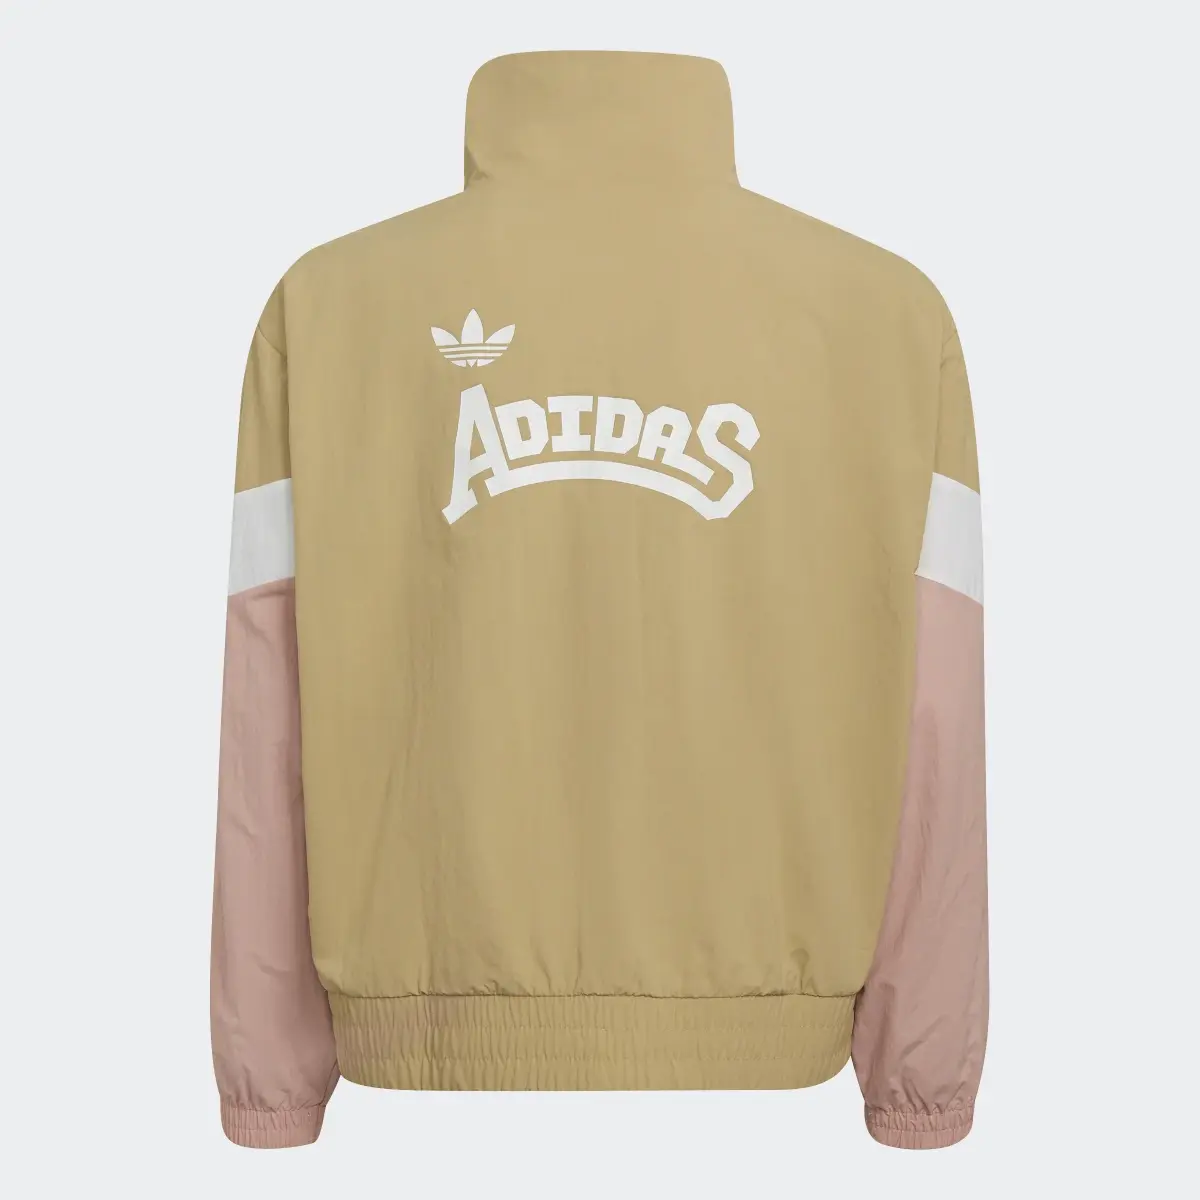 Adidas Track top Woven. 2